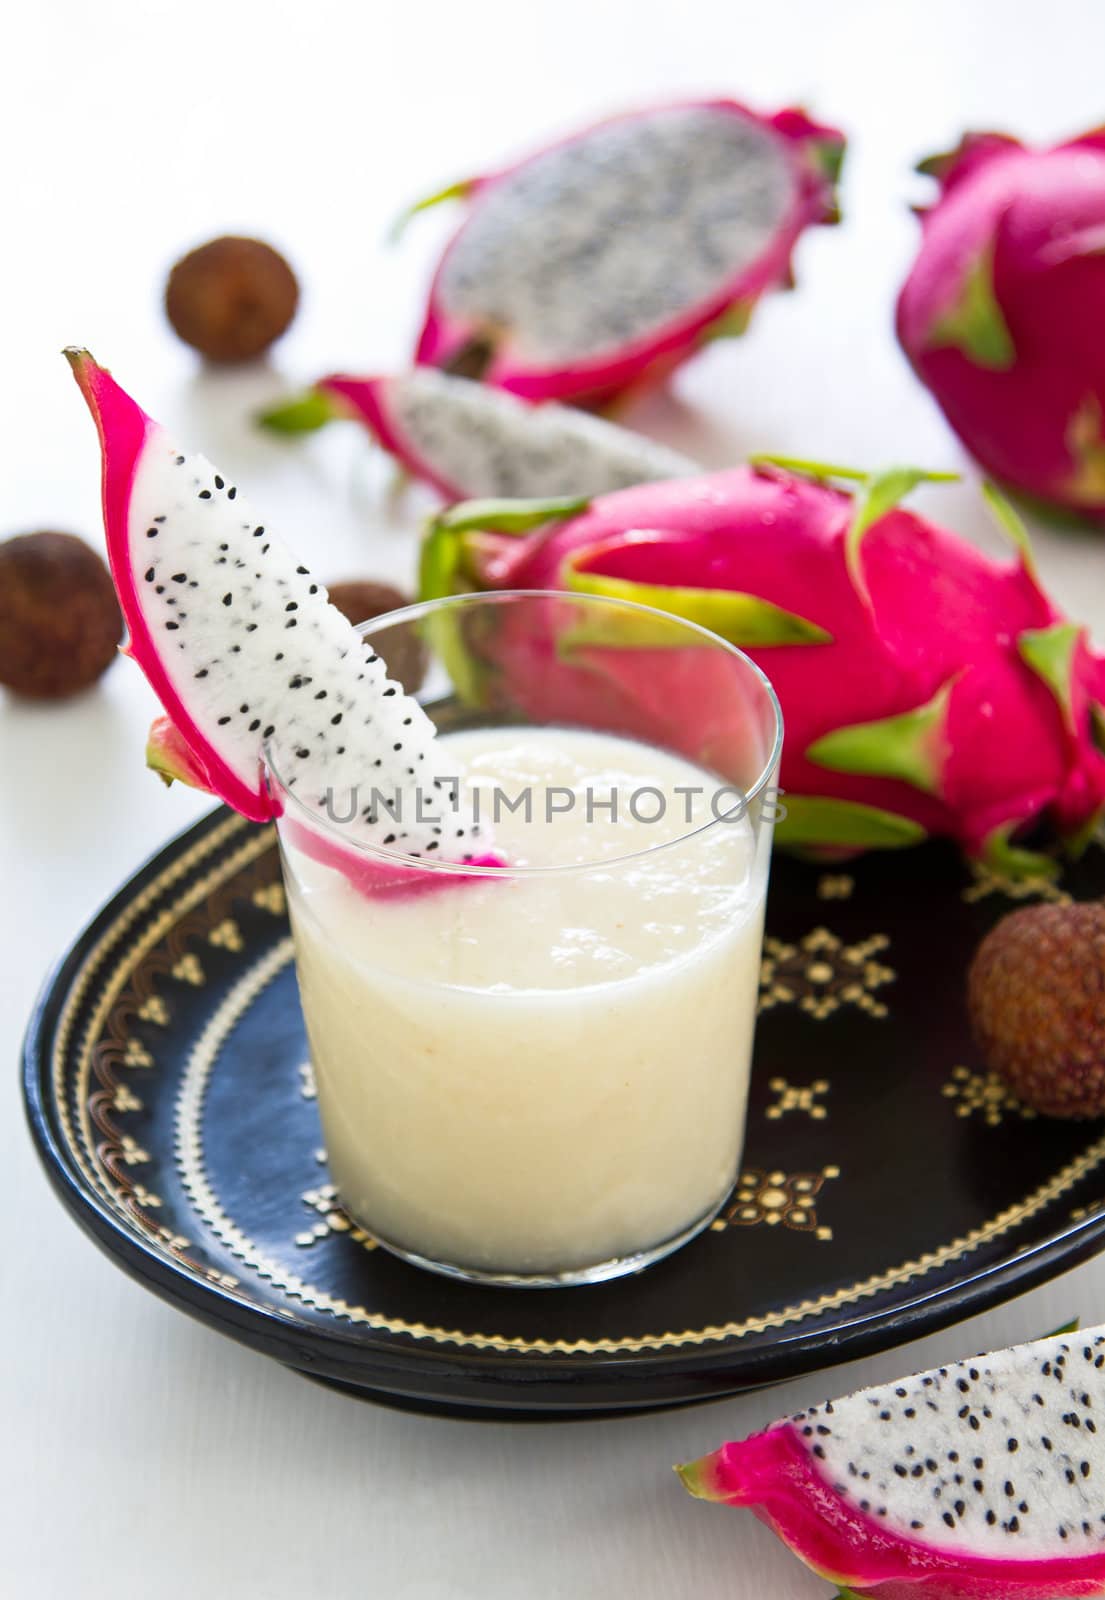 Lychee and Dragon fruit smoothie by vanillaechoes